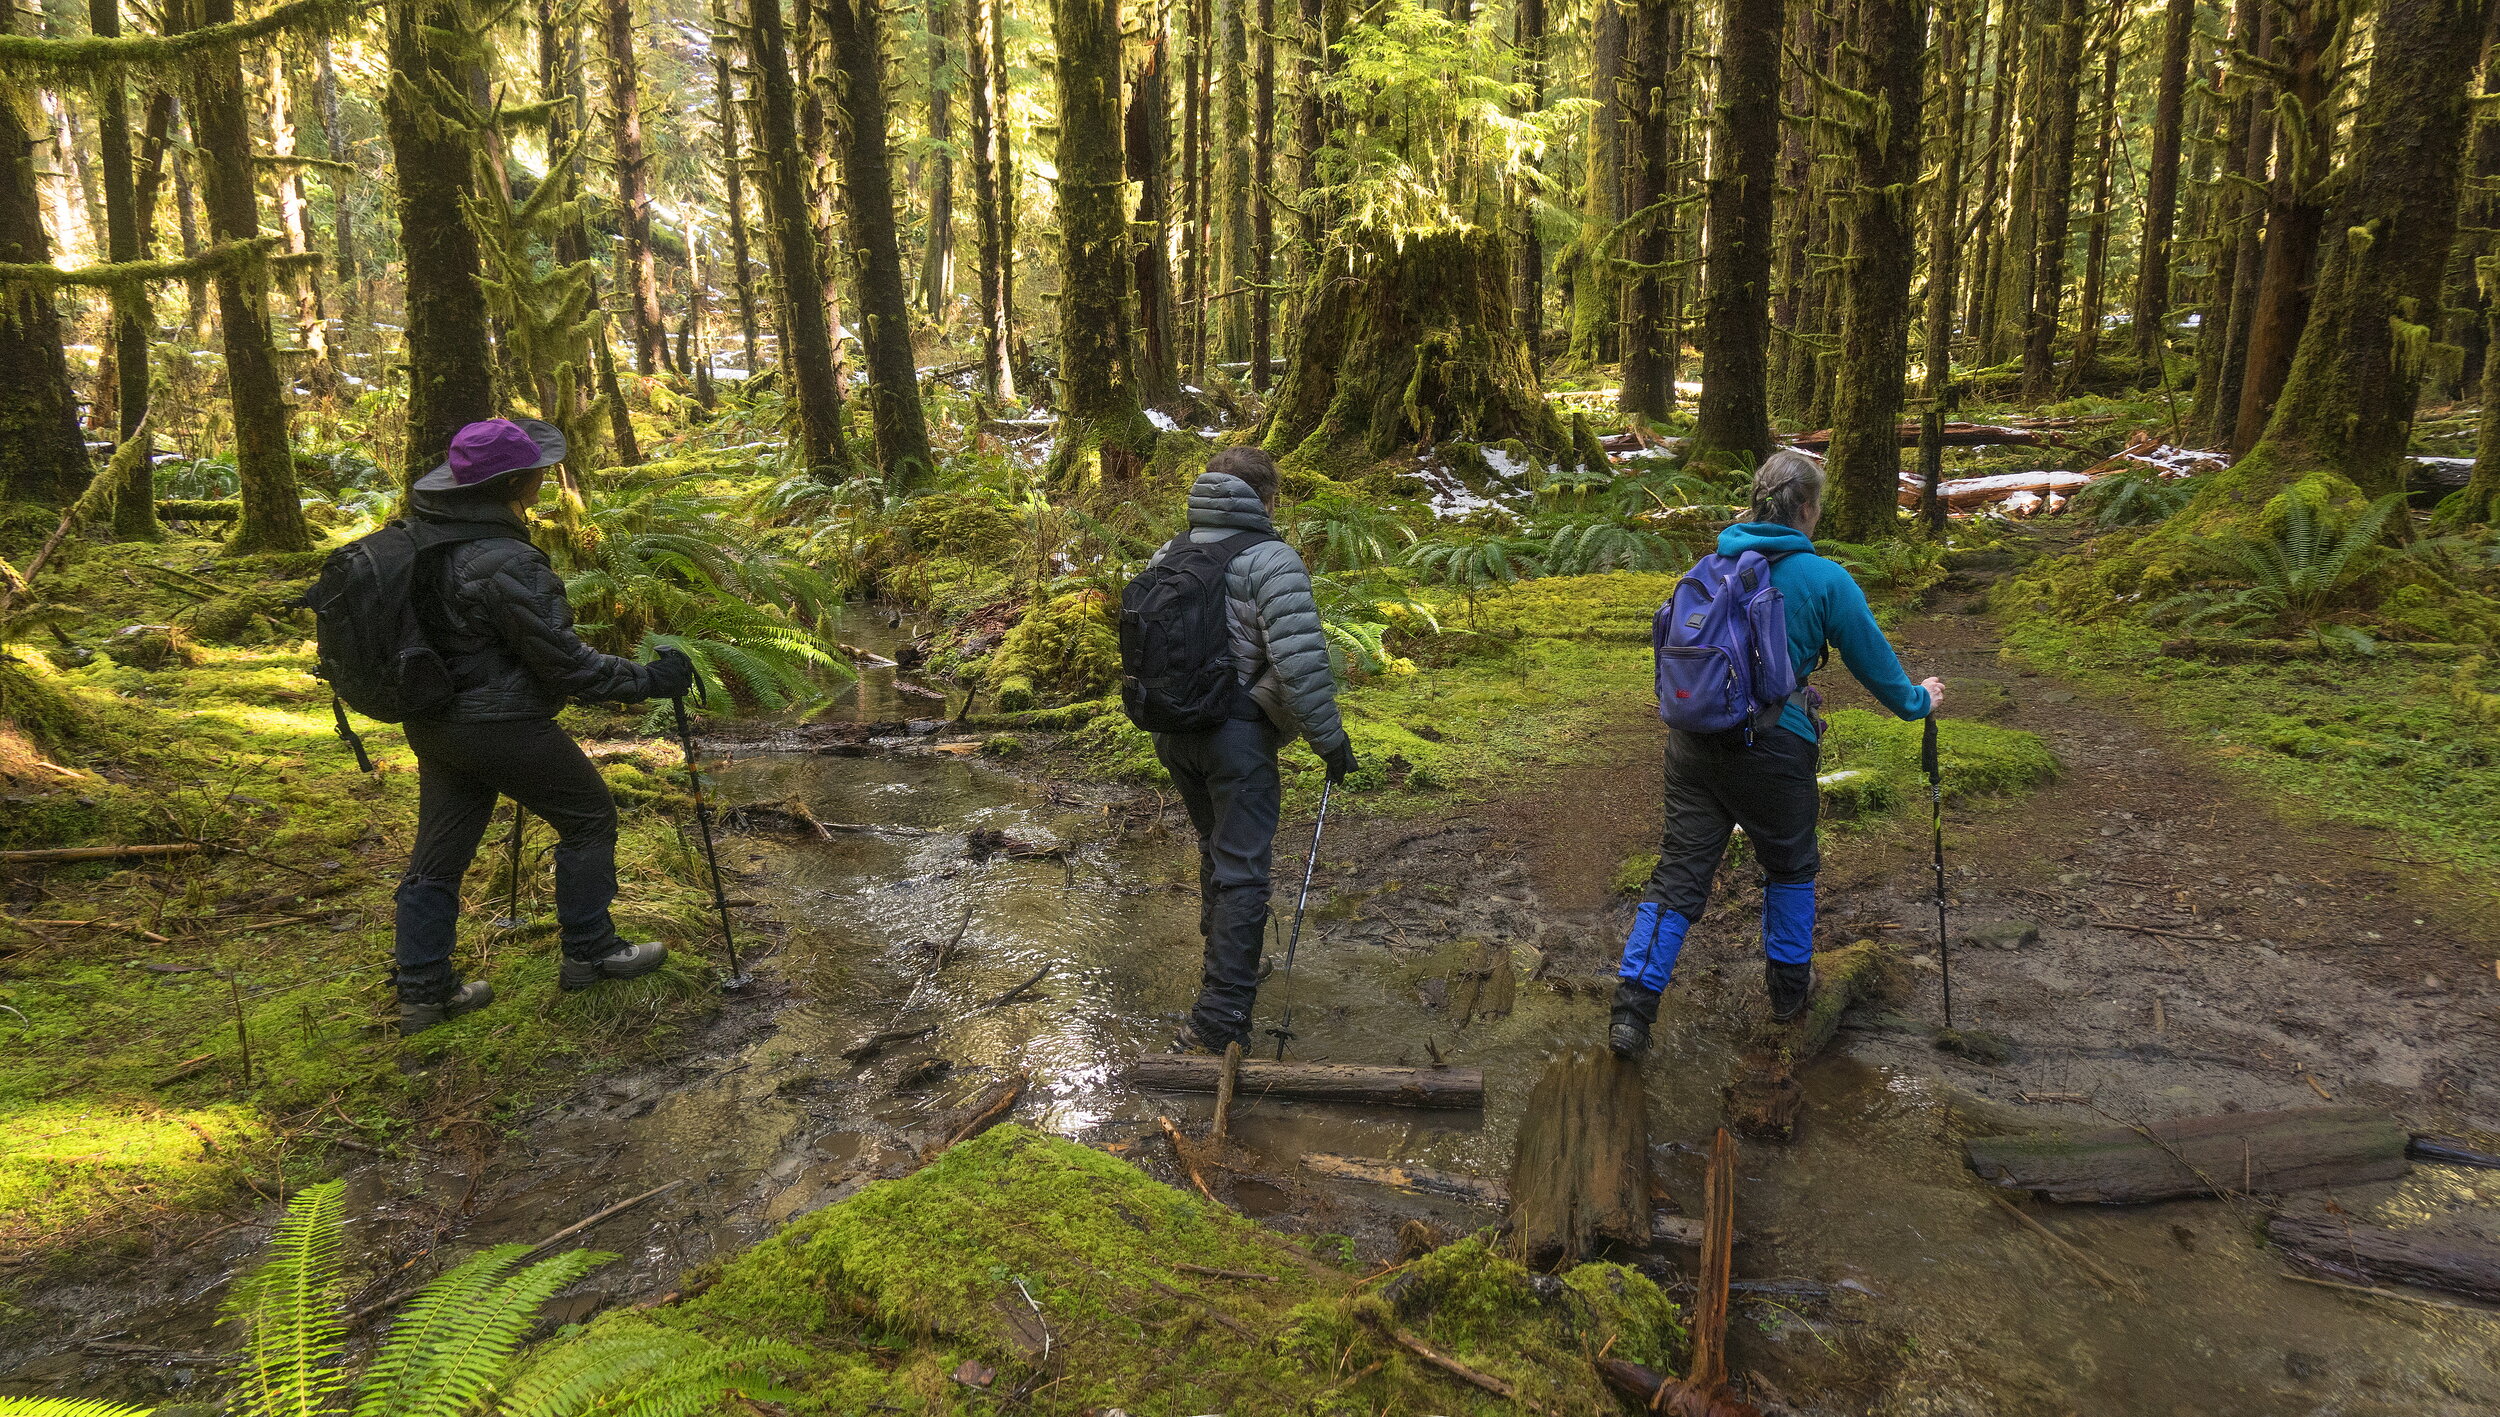 Hikers in Hoh Rain Forest. Image Port of Seattle